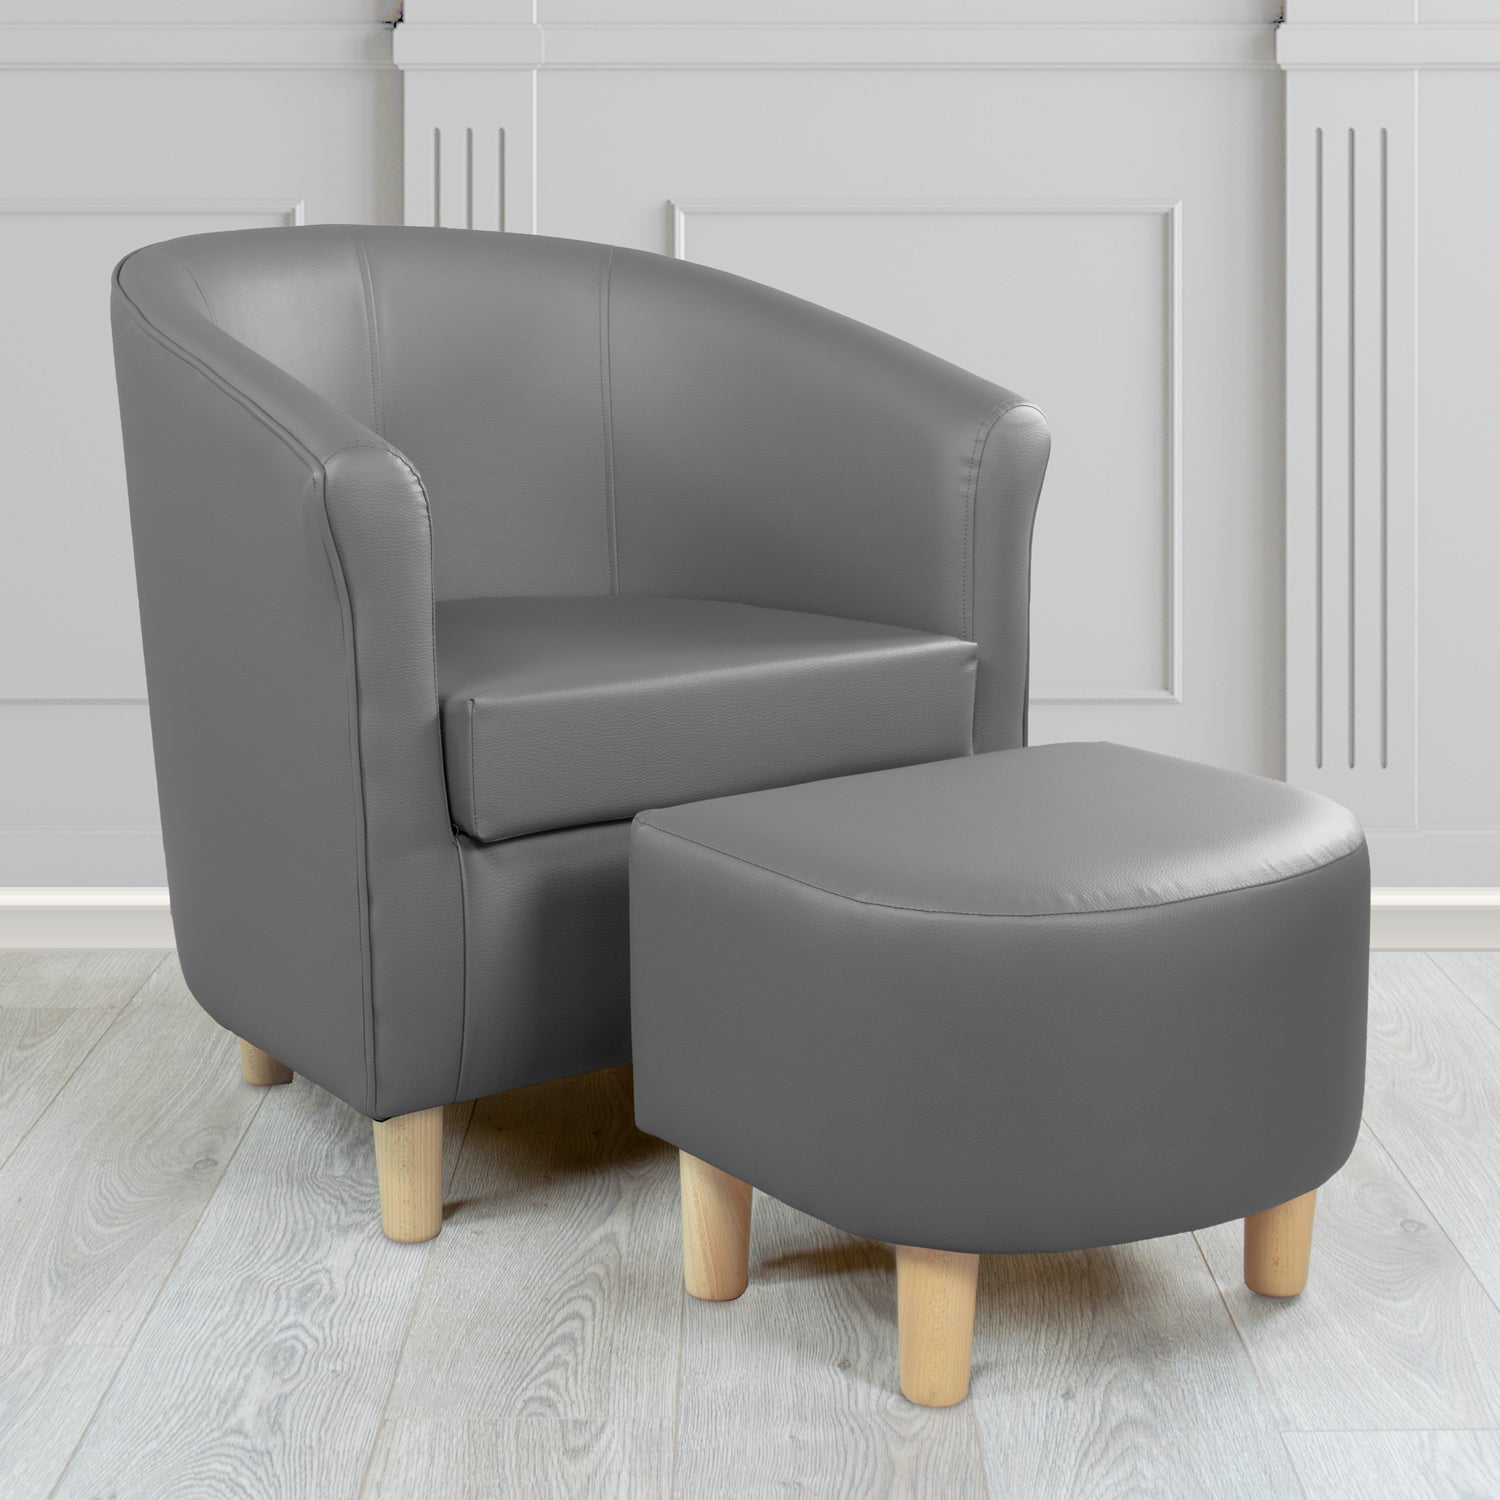 Express Tuscany Grey DSZ Faux Leather Tub Chair with Footstool Set (6541302005802)